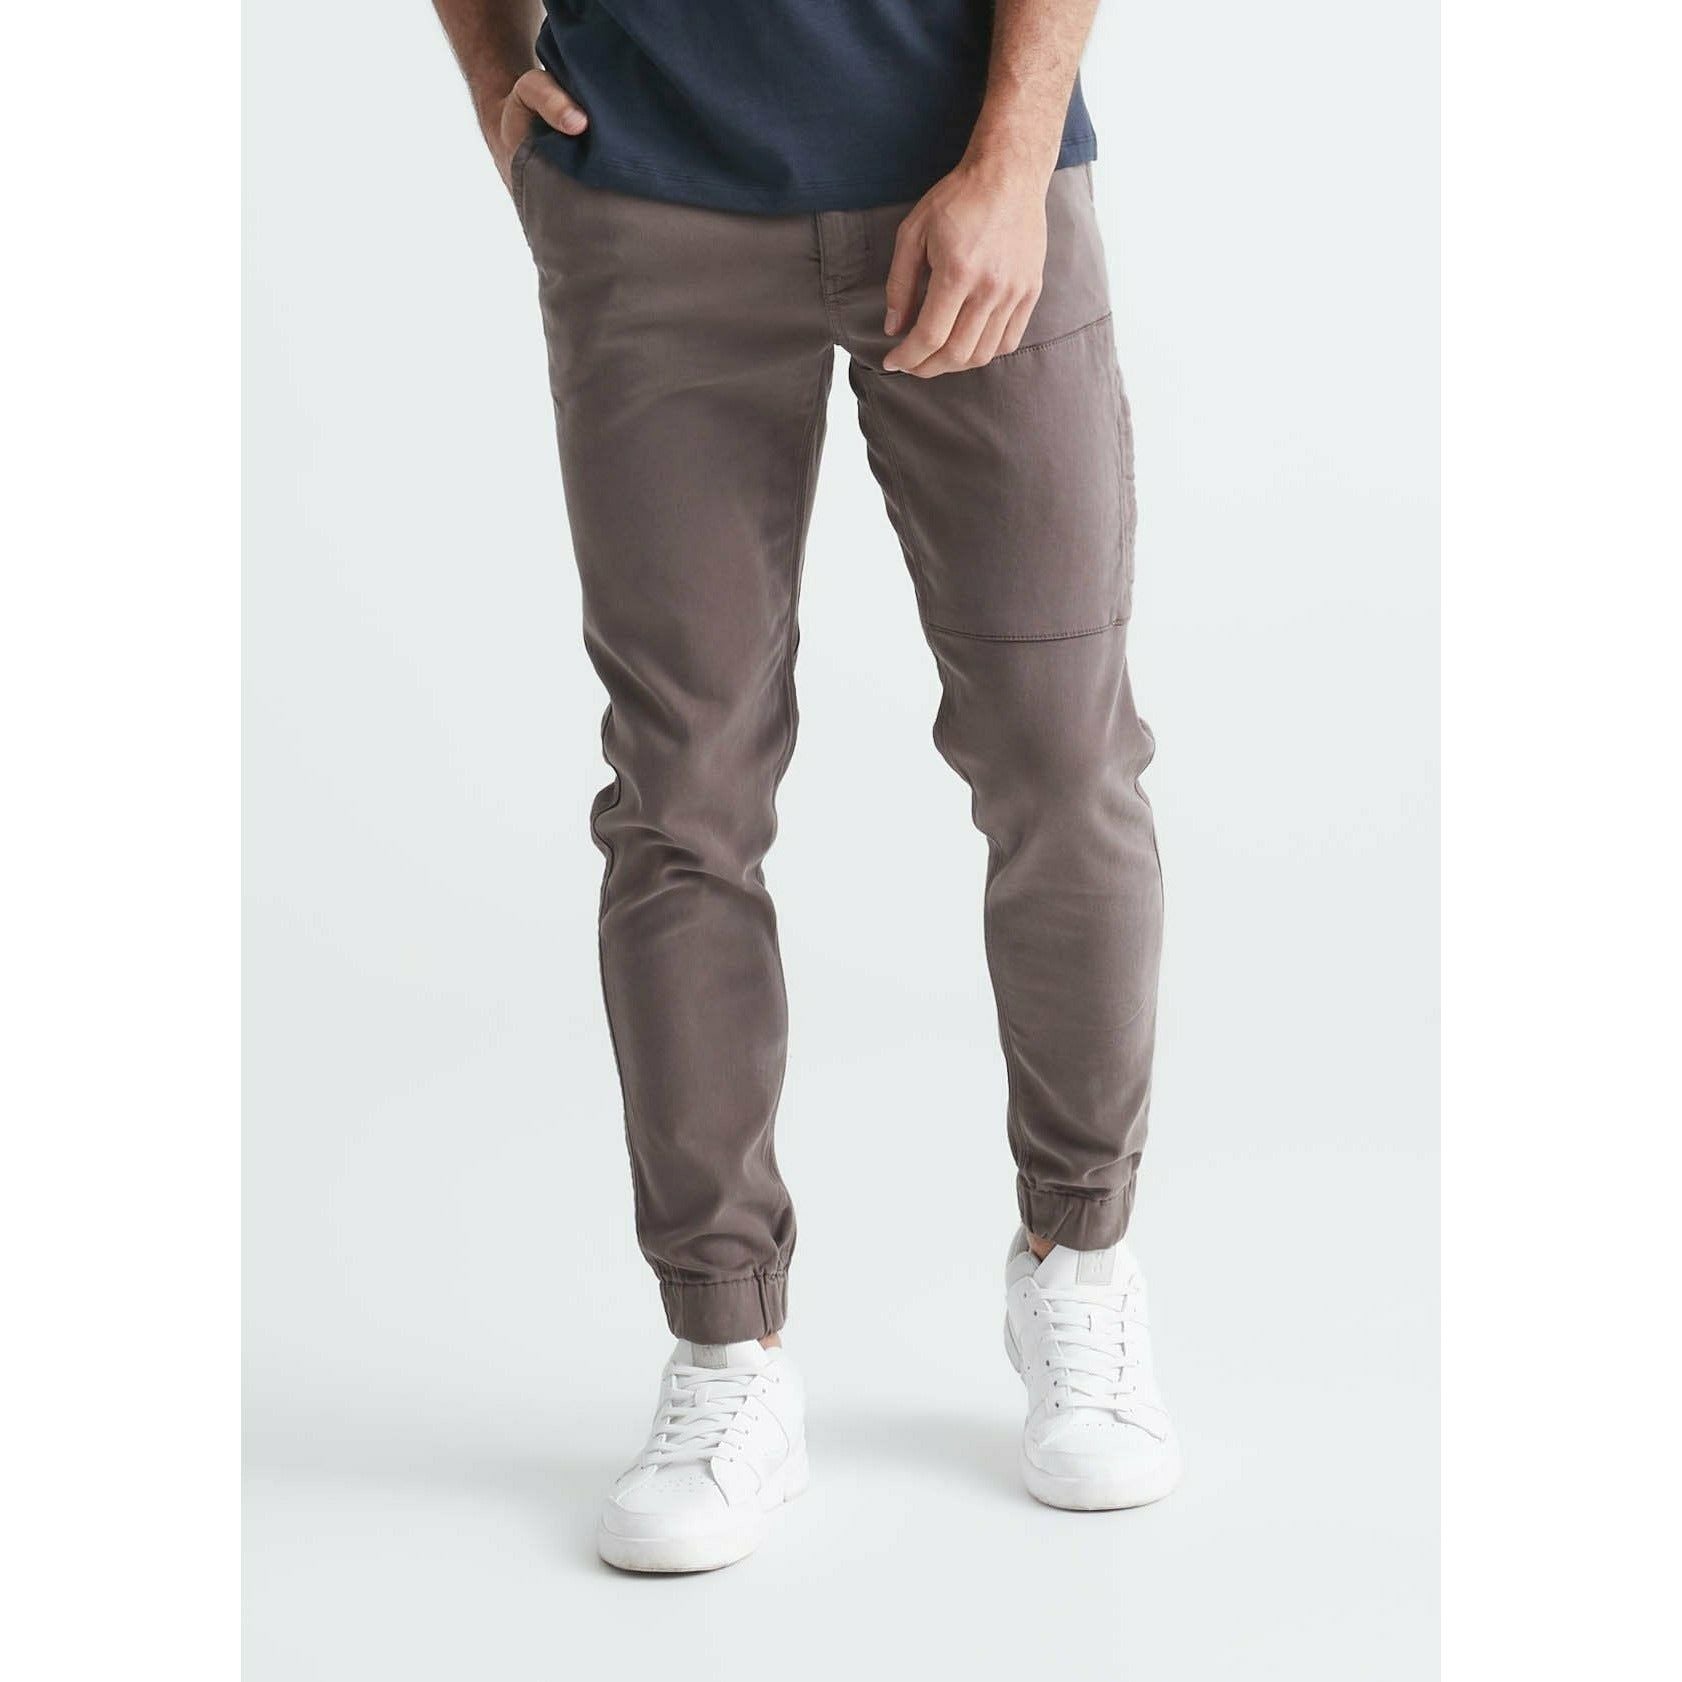 No Sweat Jogger for Men's – Olodge